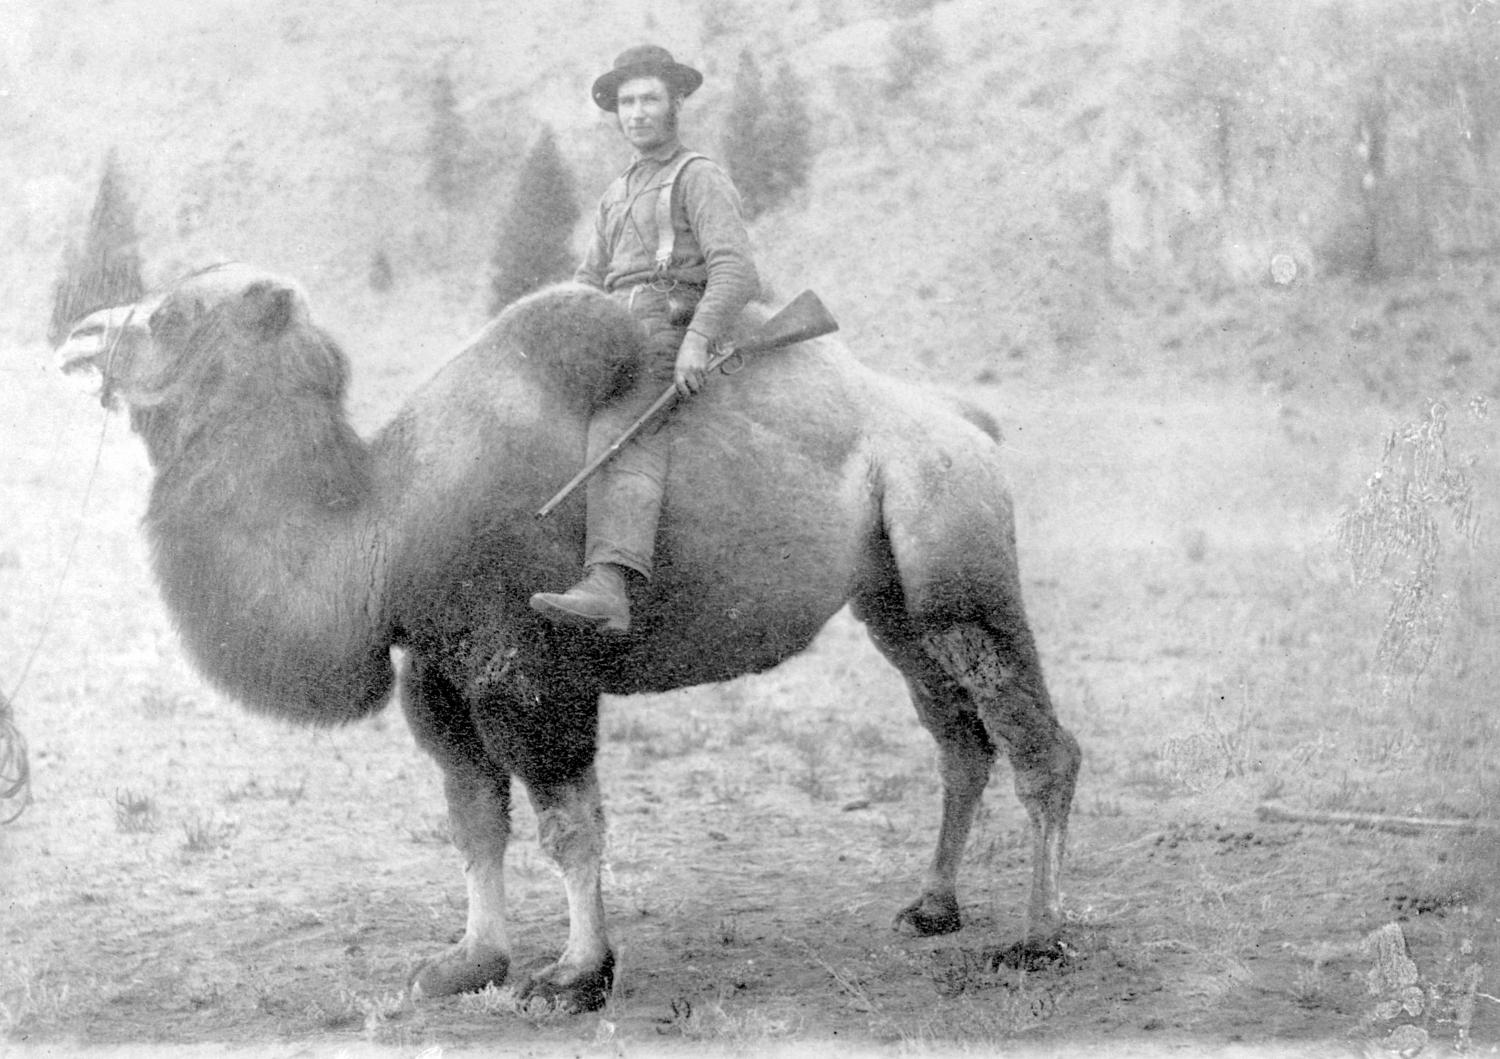 Man on camel once used as a pack animal on the Cariboo Wagon Road.